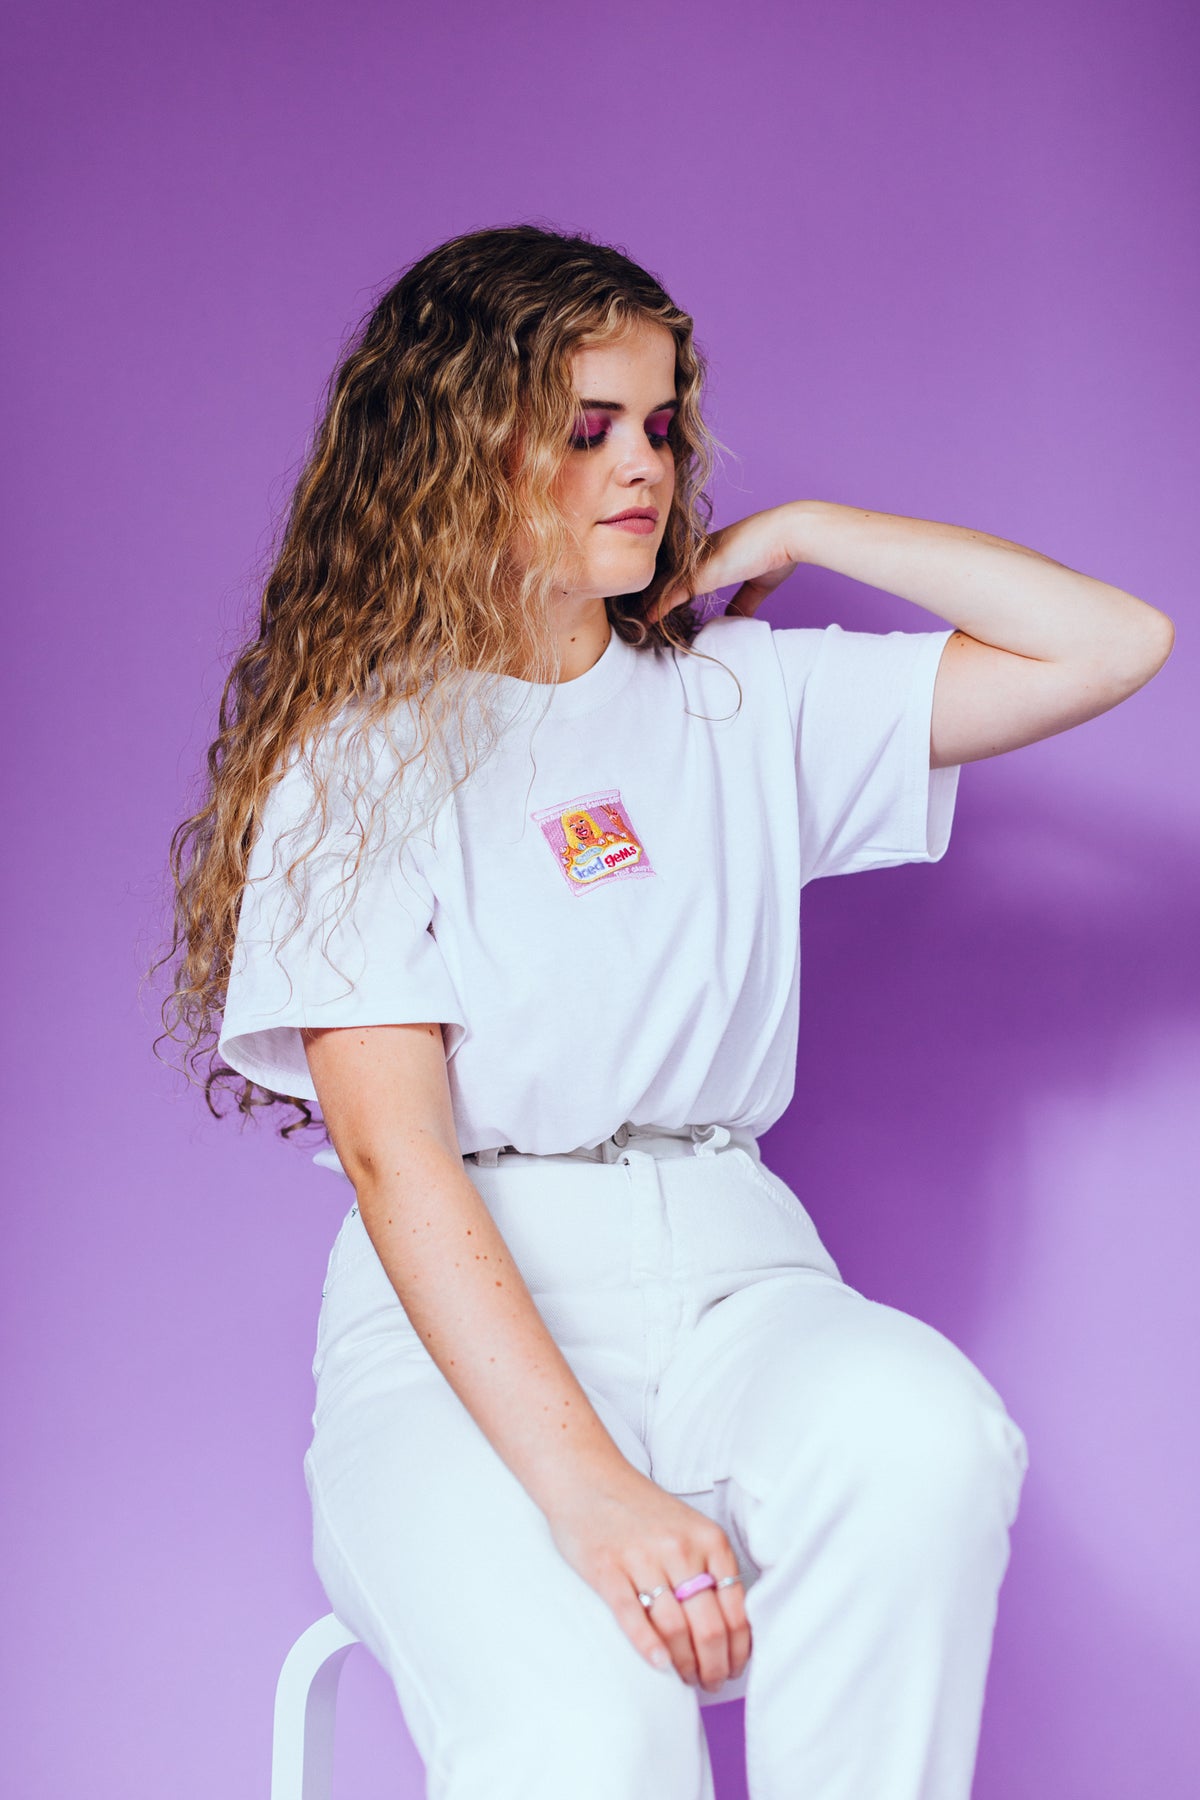 Iced Gem&#39;s Embroidered T-Shirt